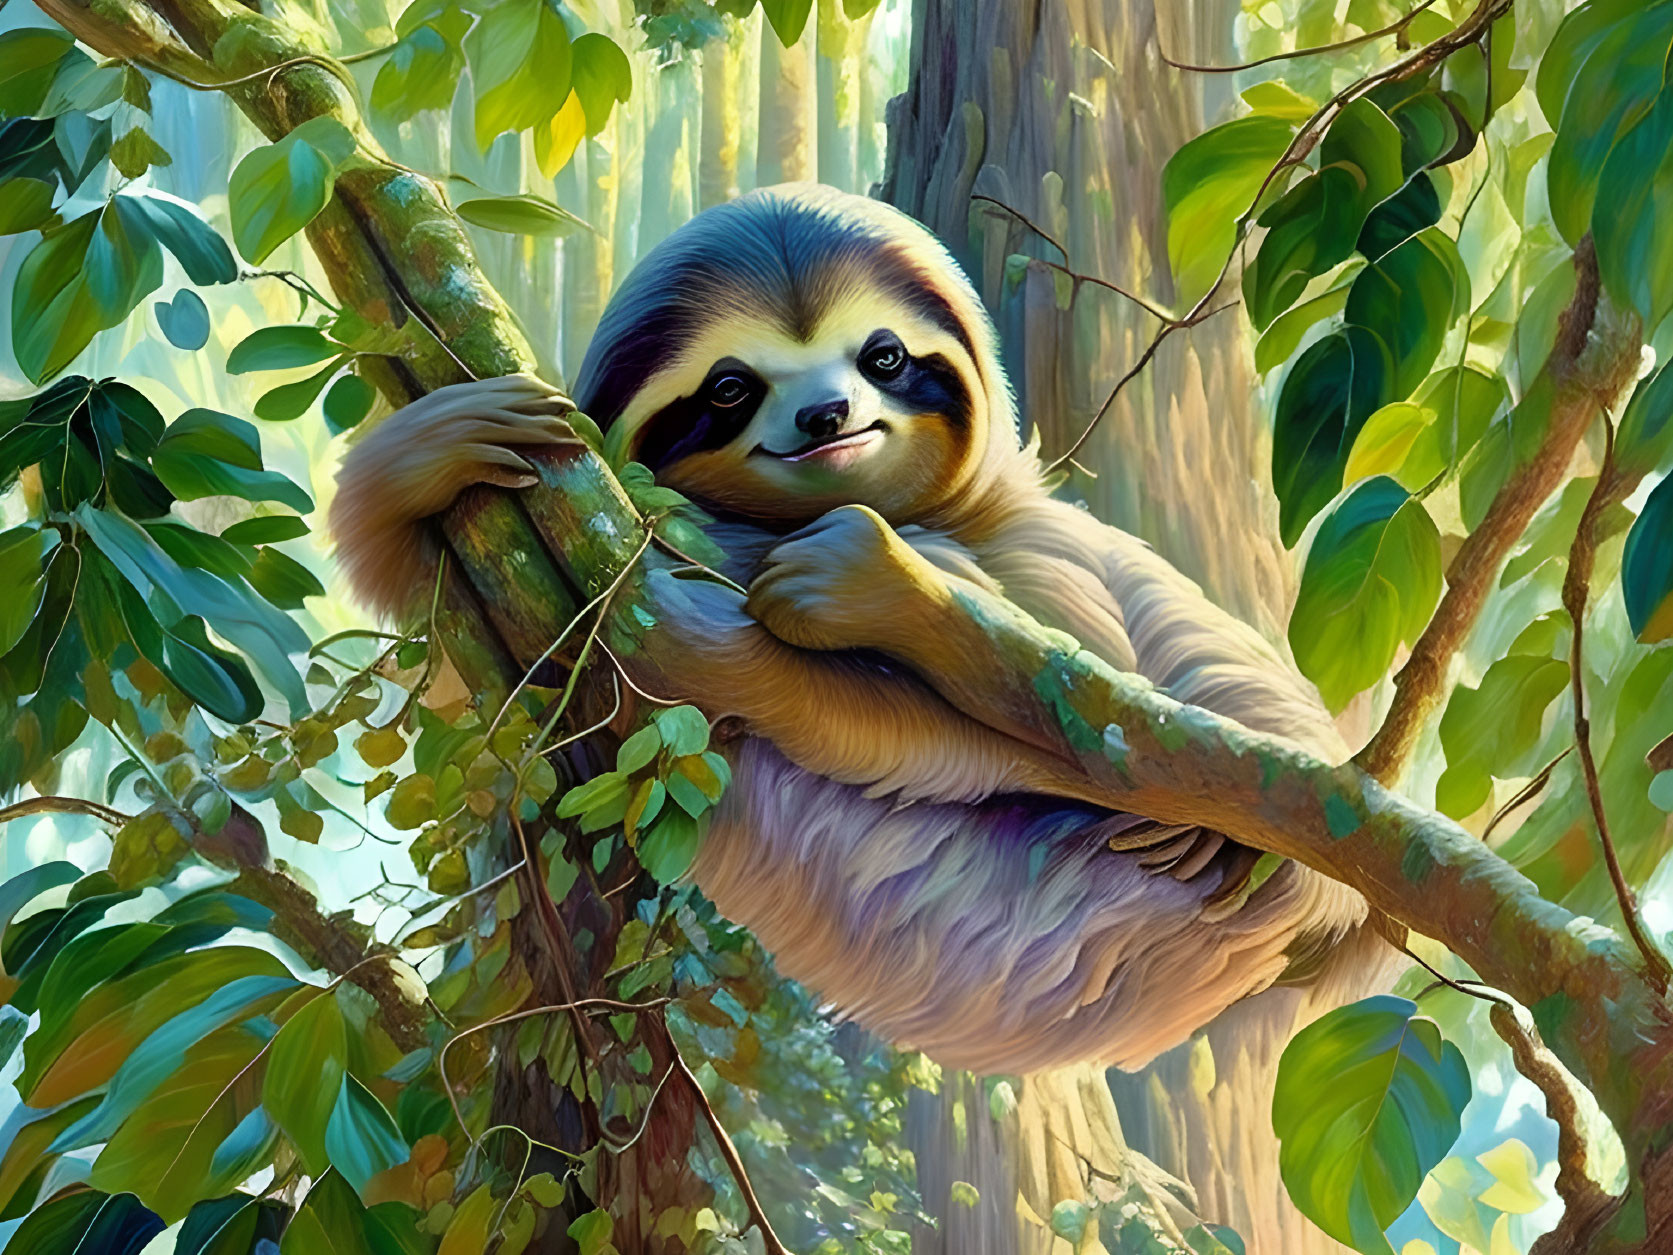 Smiling sloth relaxing on lush tree branch